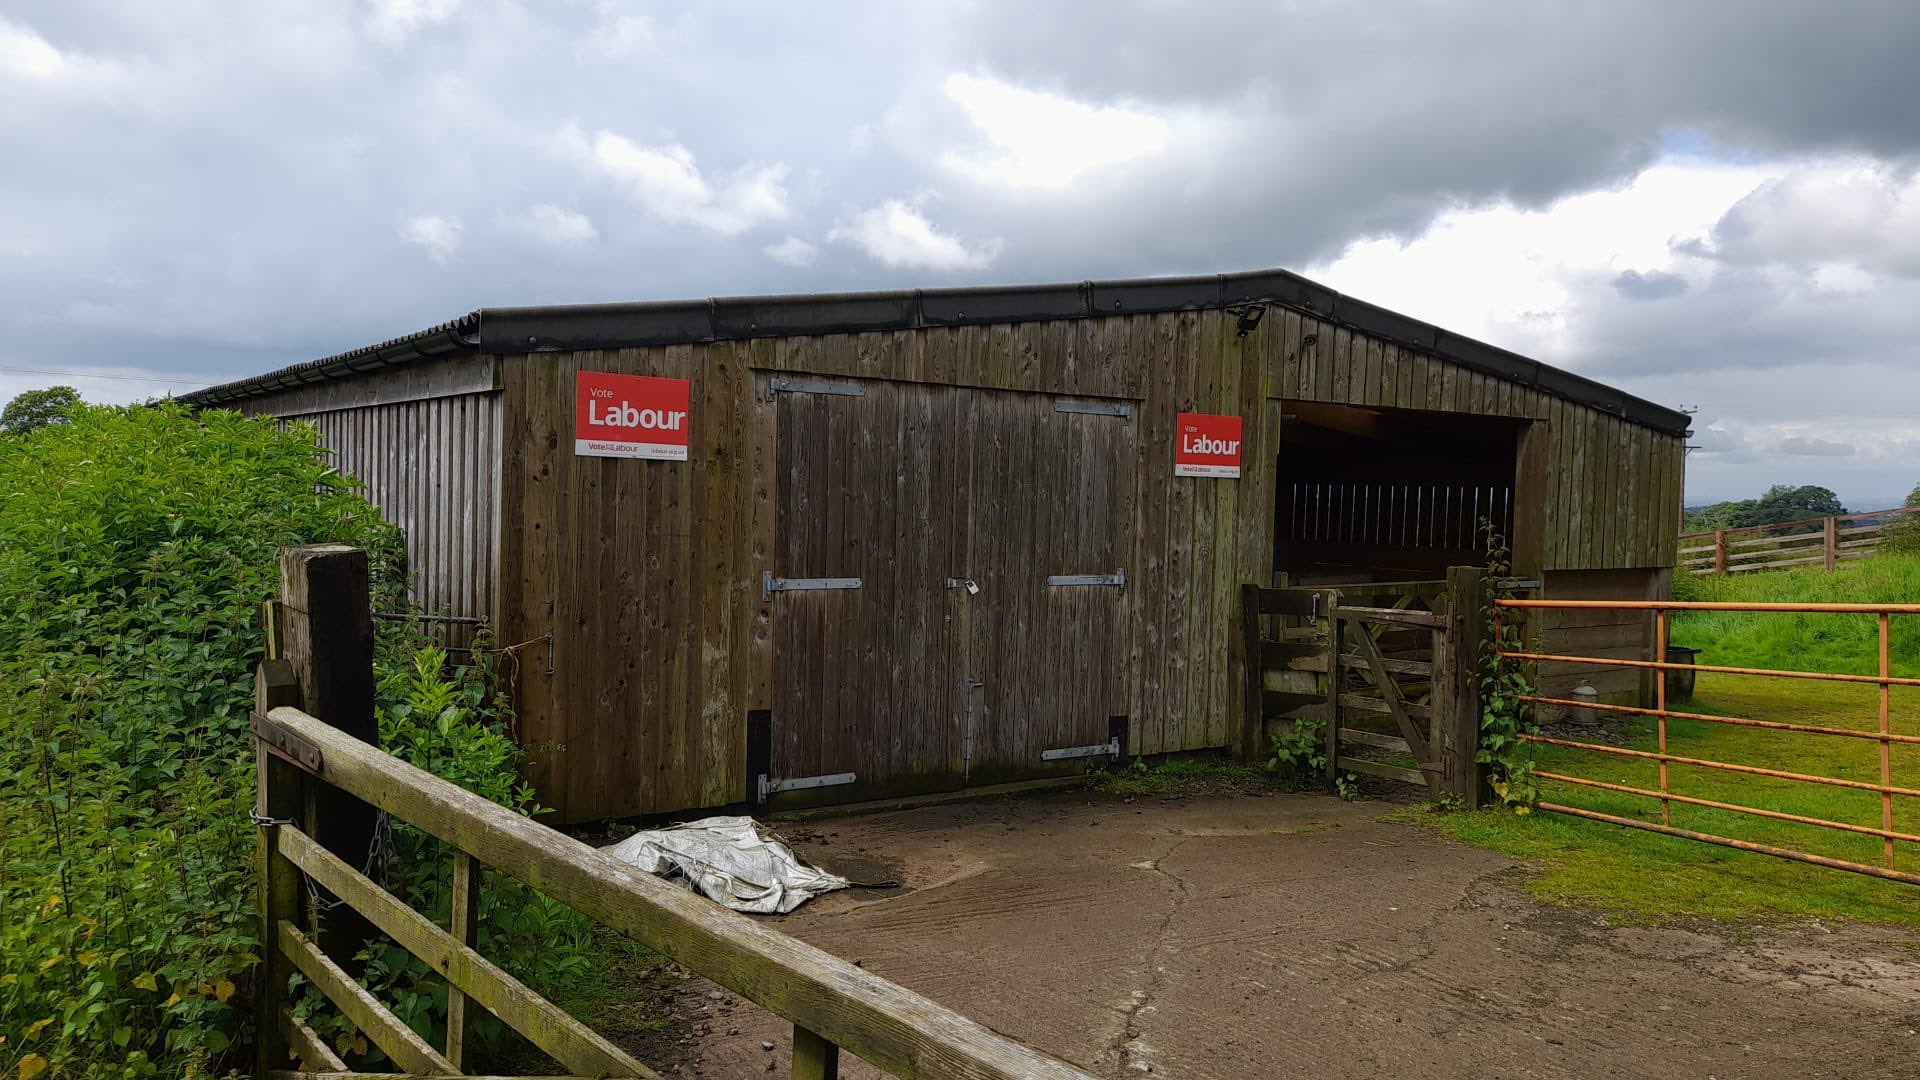 A local farmer puts Labour posters up on his barn to support Wilson against Sunak